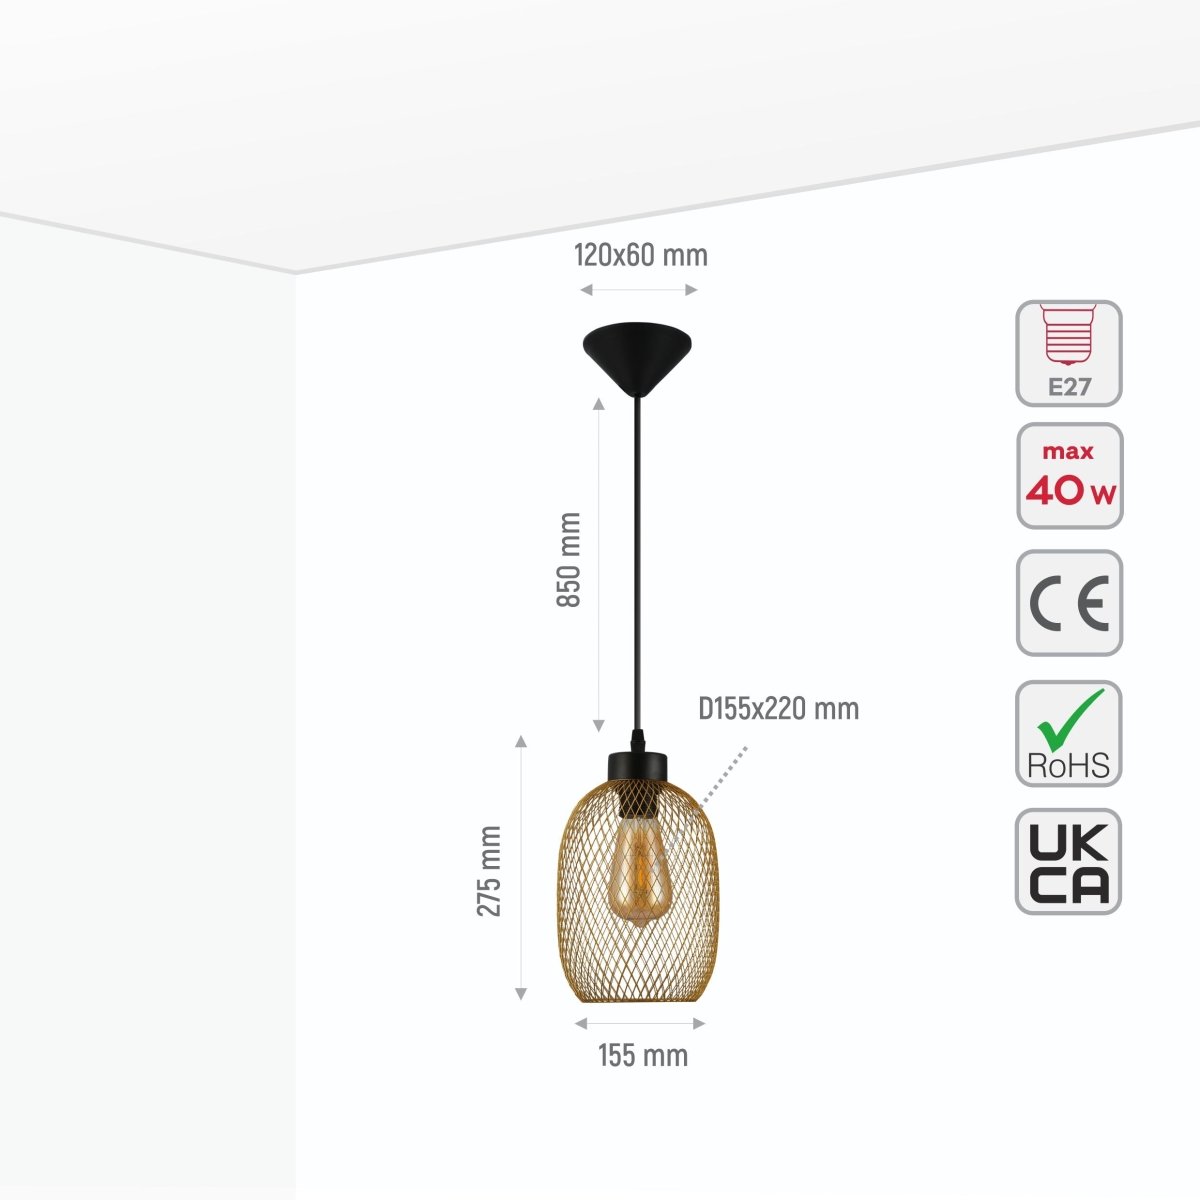 Size and specs of Mesh Cage Lantern Metal Pendant Ceiling Light E27 Gold D155 150-18240